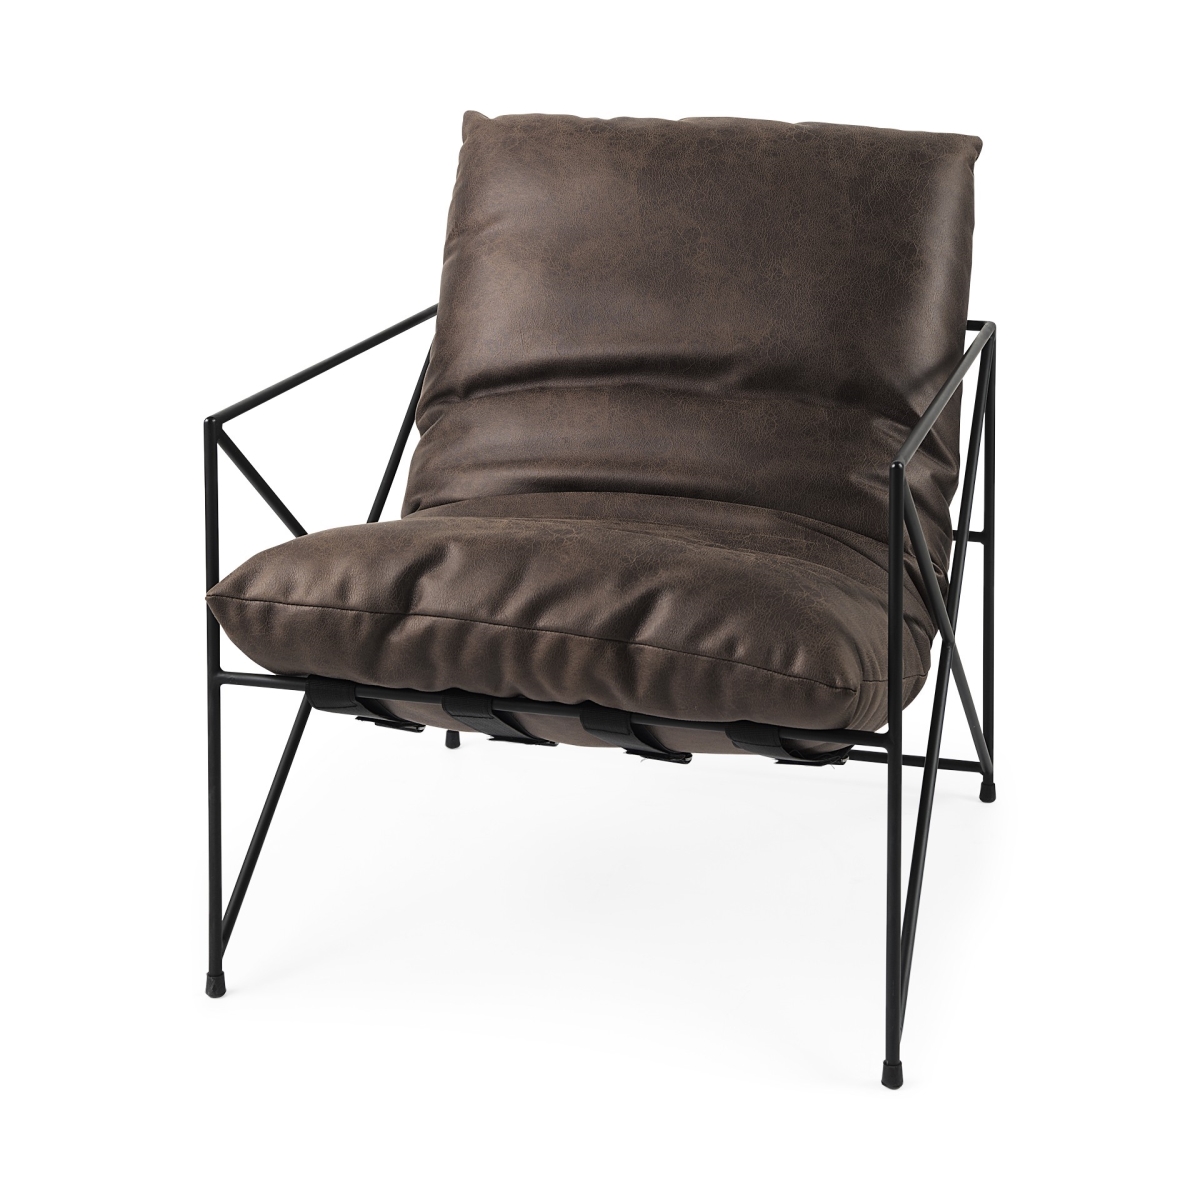 Gfancy Fixtures Dark Brown Faux Leather Contemporary Metal Chair